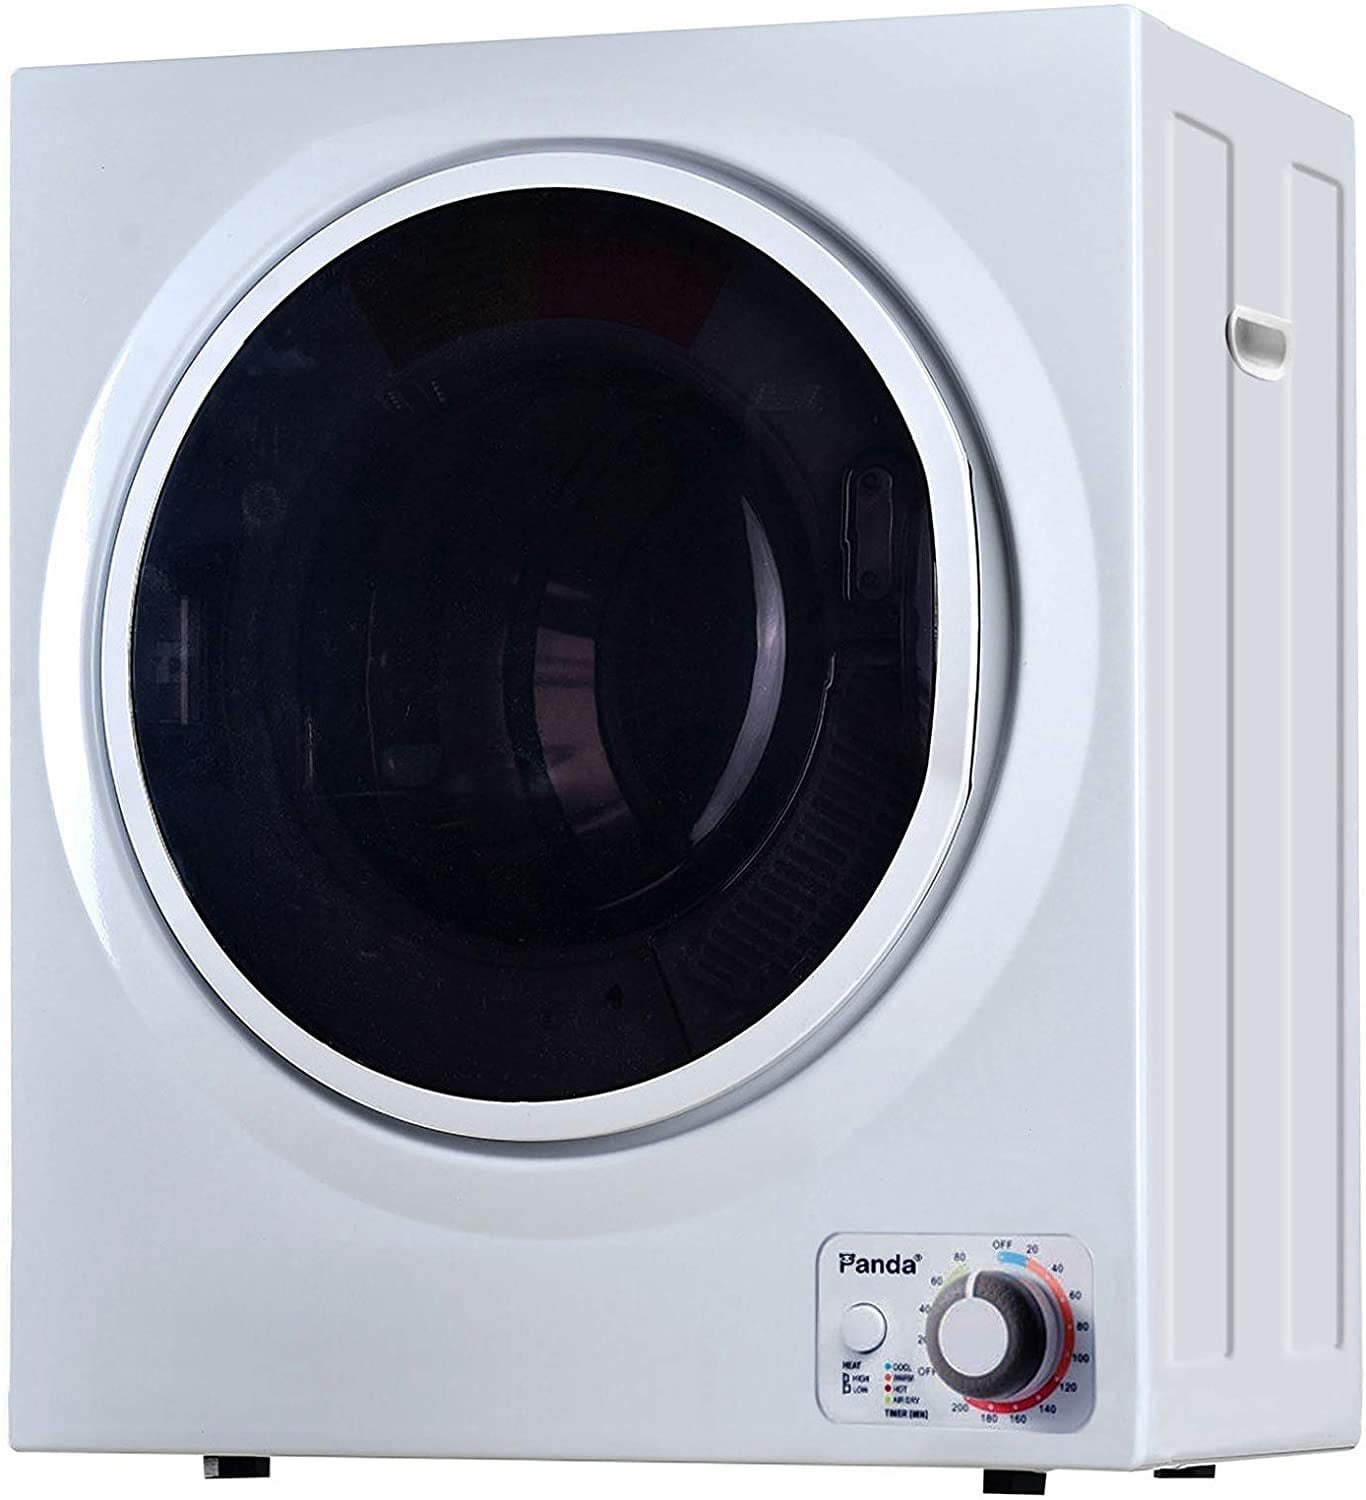 Magic Chef MCSDRY1S Compact 2.6 cu Electric Dryer in White for sale online ft 